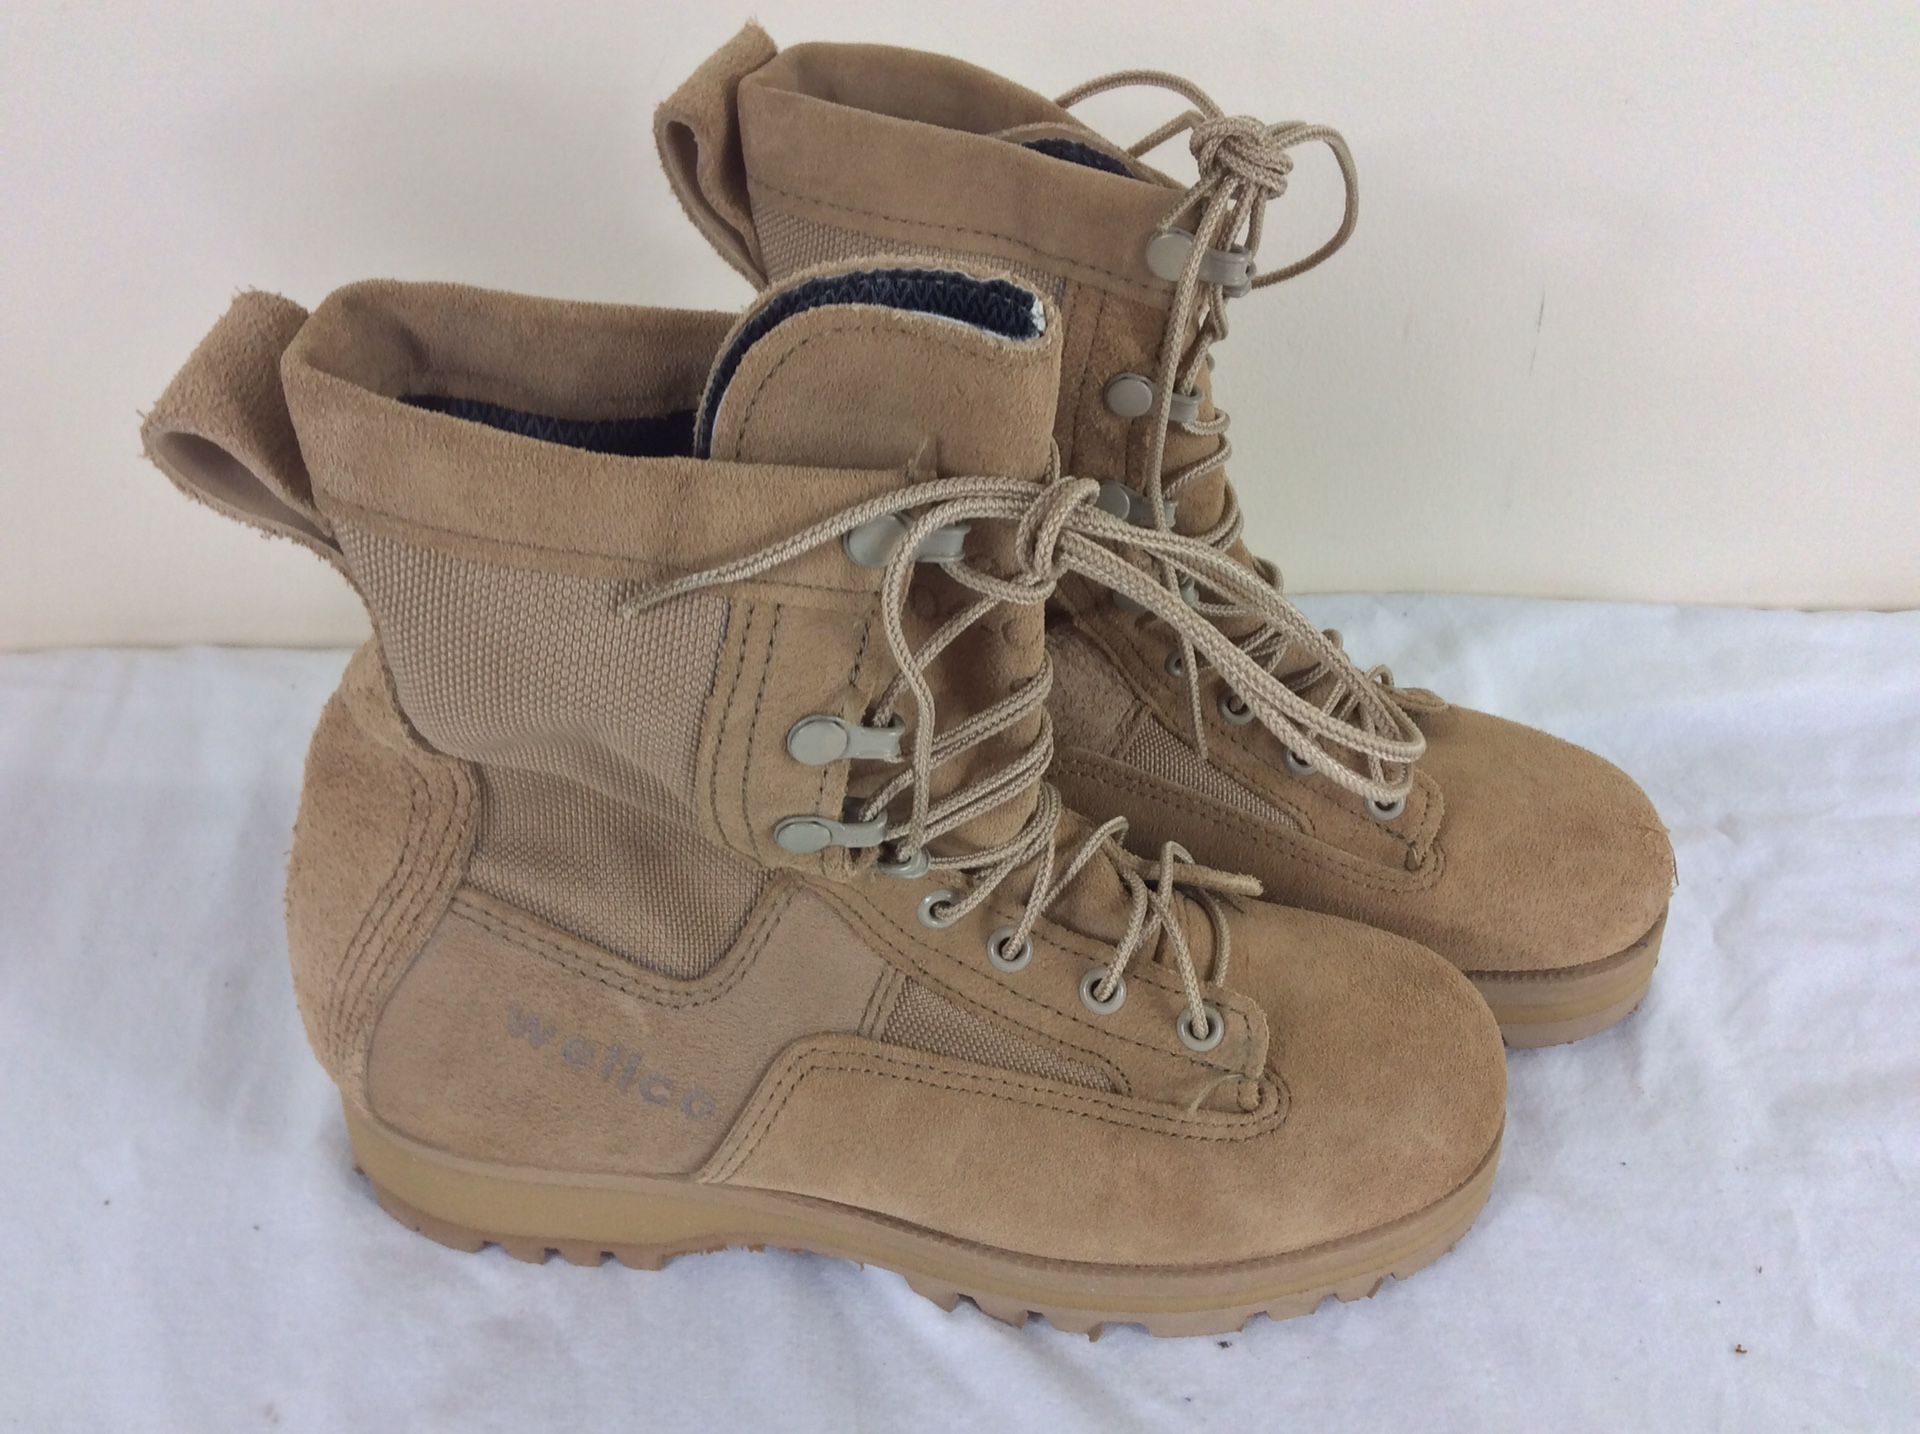 Wellco US ARMY Desert Combat Boots Military Hot Weather Size 5 R